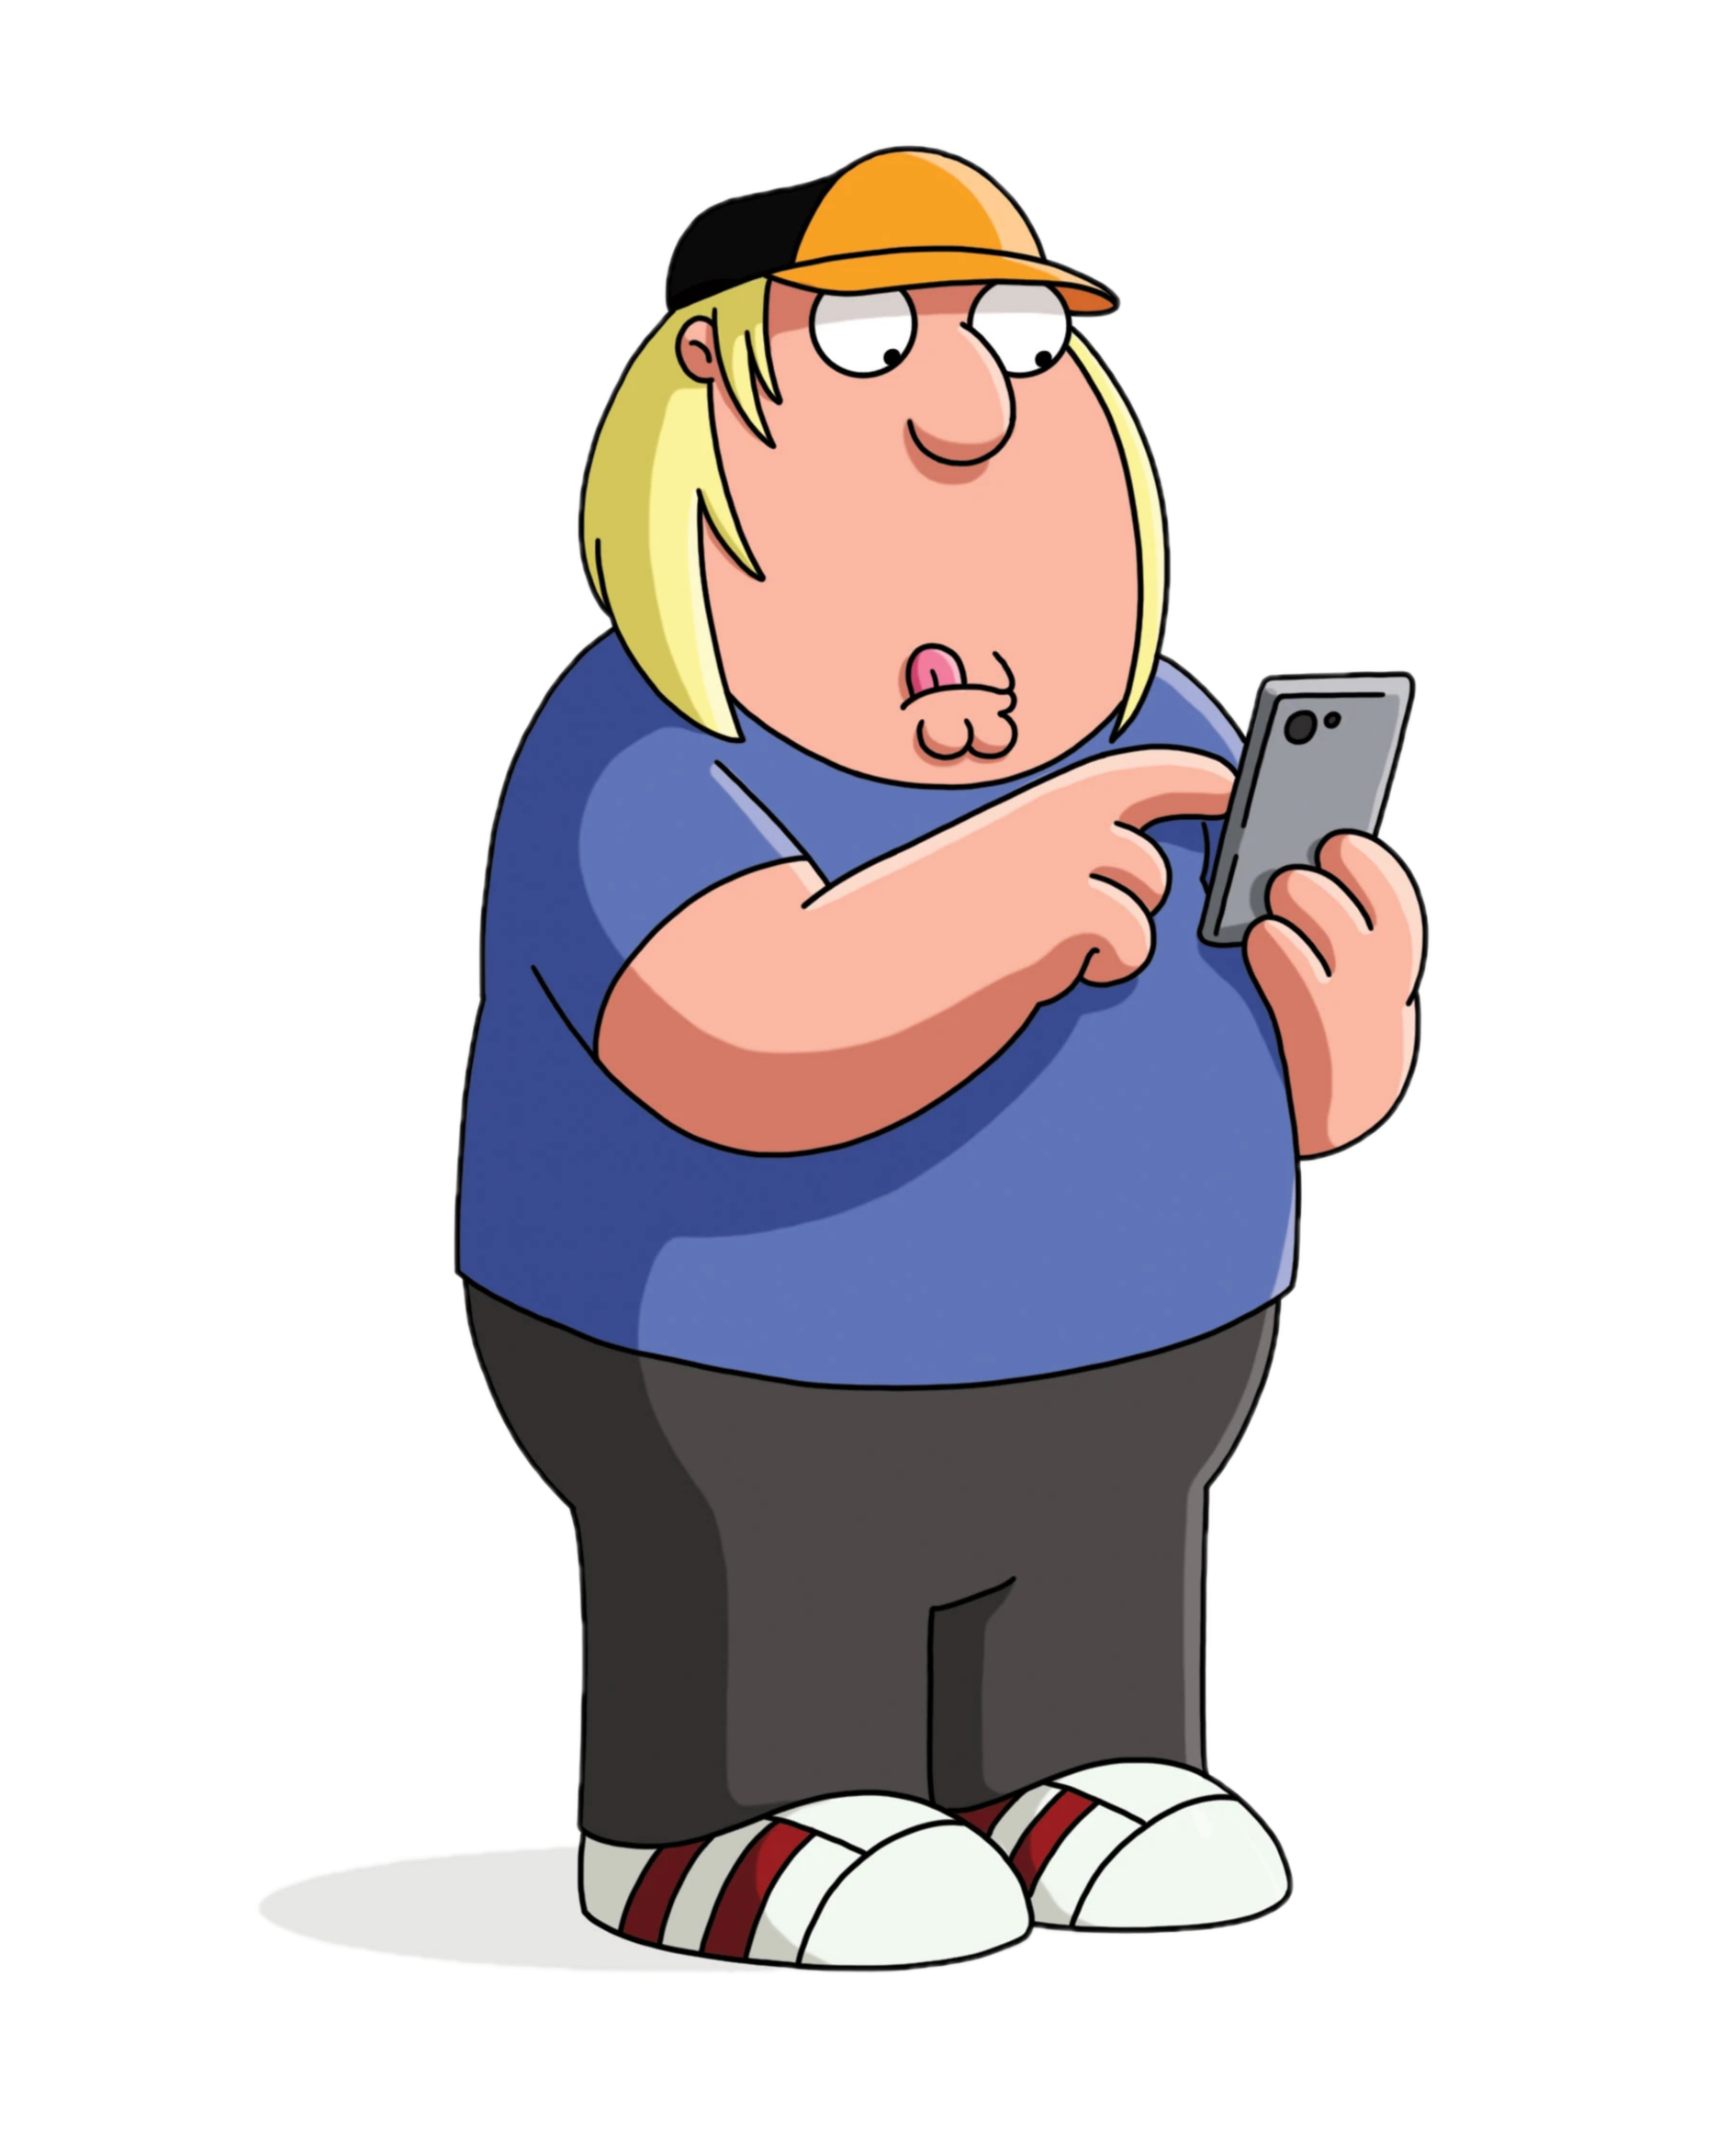 Chris Griffin.png